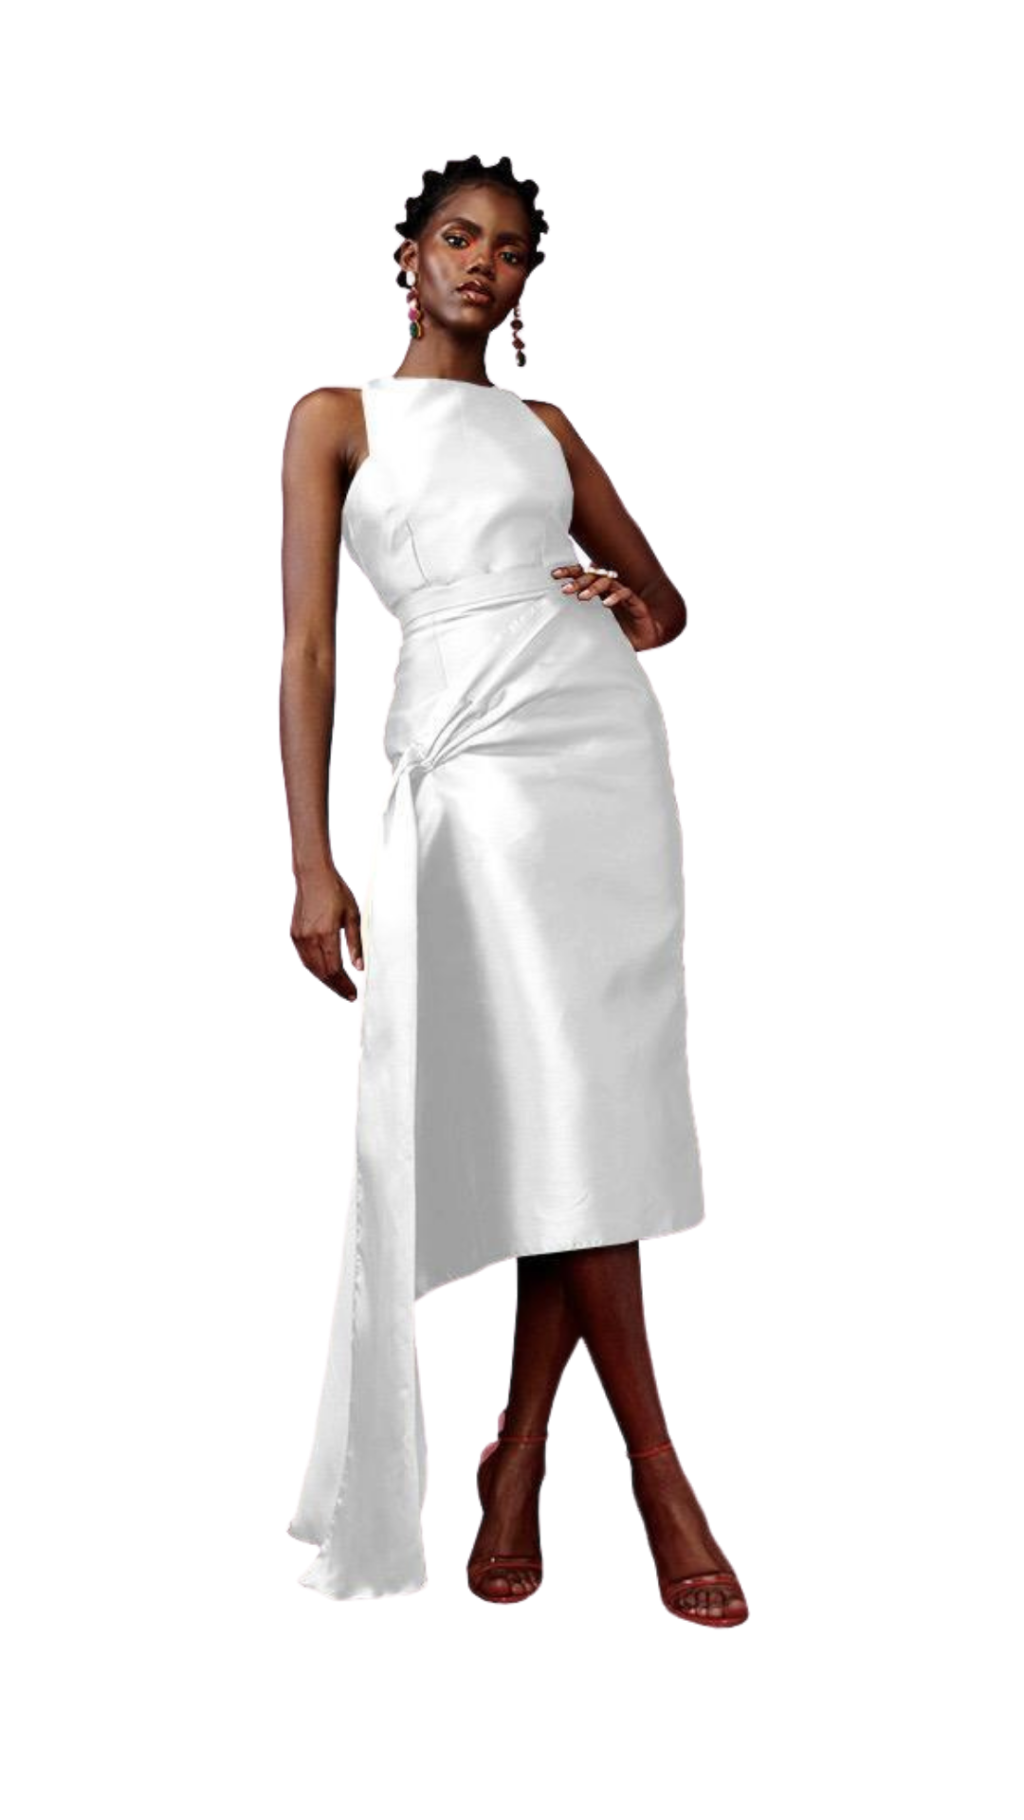 A model wearing a white silk satin top and skirt